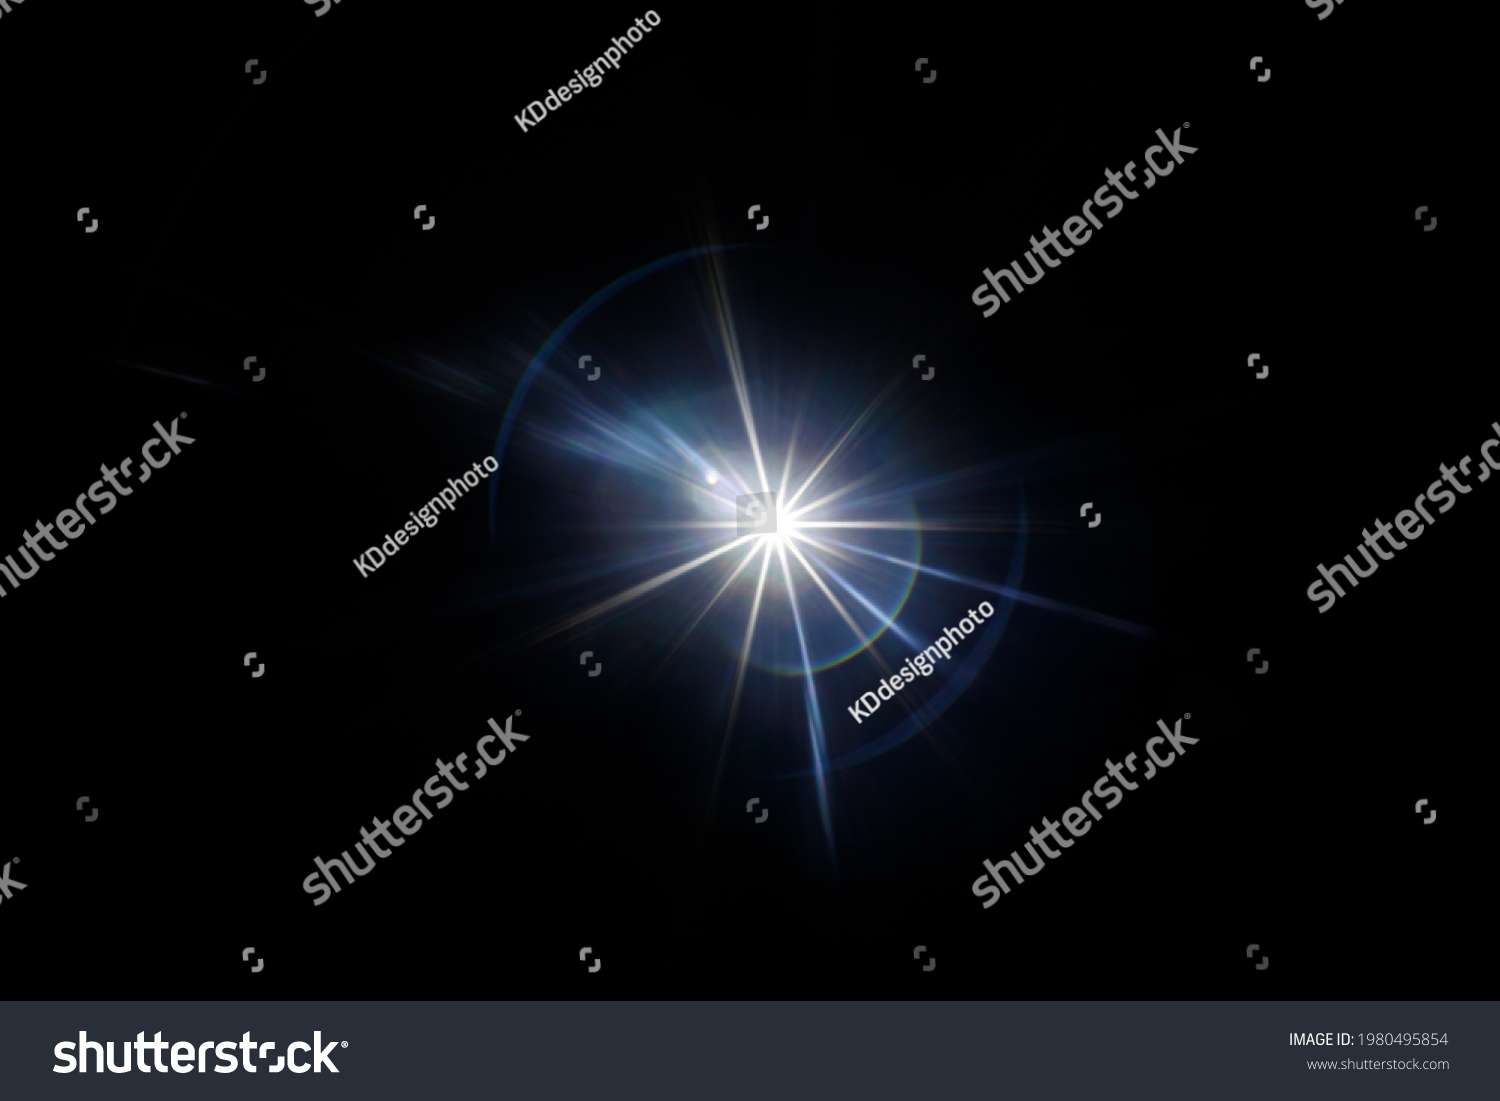 Easy to add lens flare effects for overlay designs or screen blending mode to make high-quality images. Abstract sun burst, digital flare, iridescent glare over black background. #1980495854